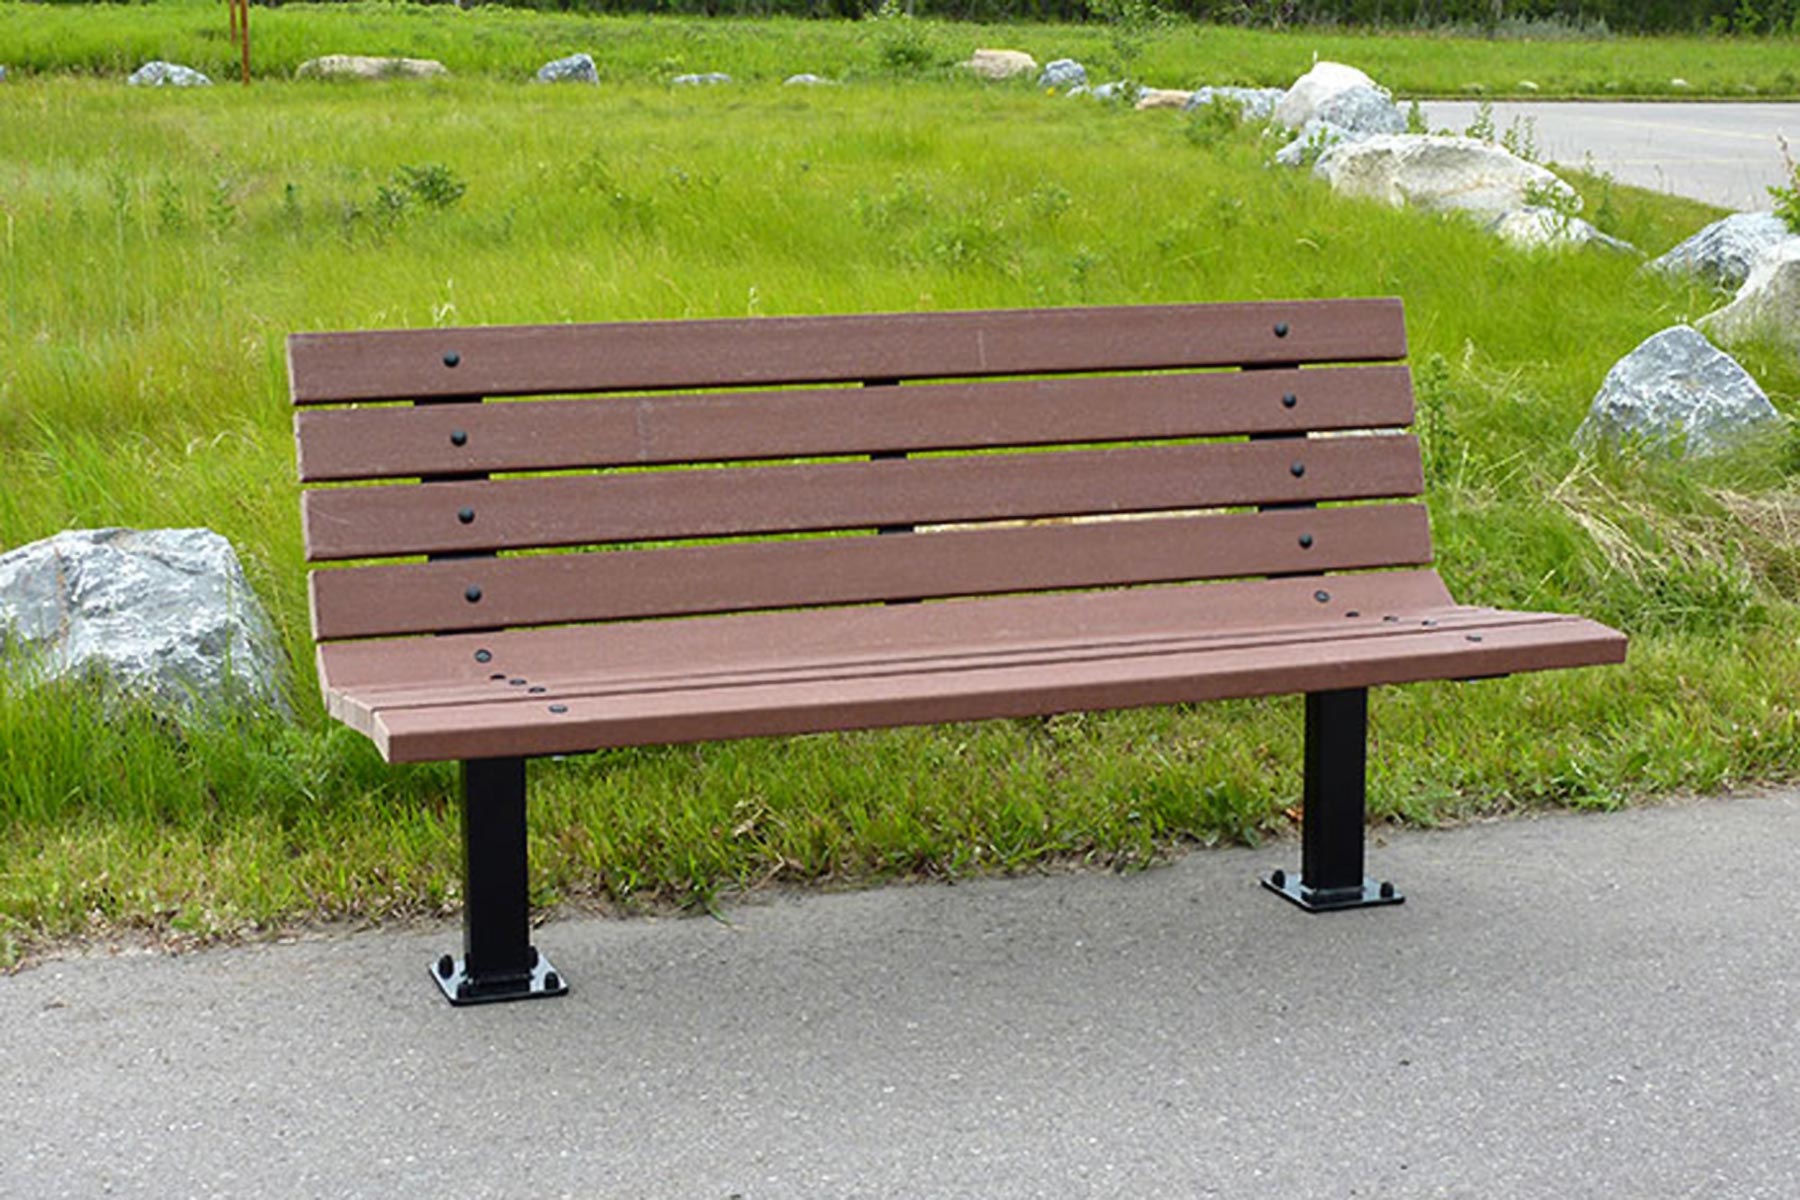 Park benches photos found on the web.